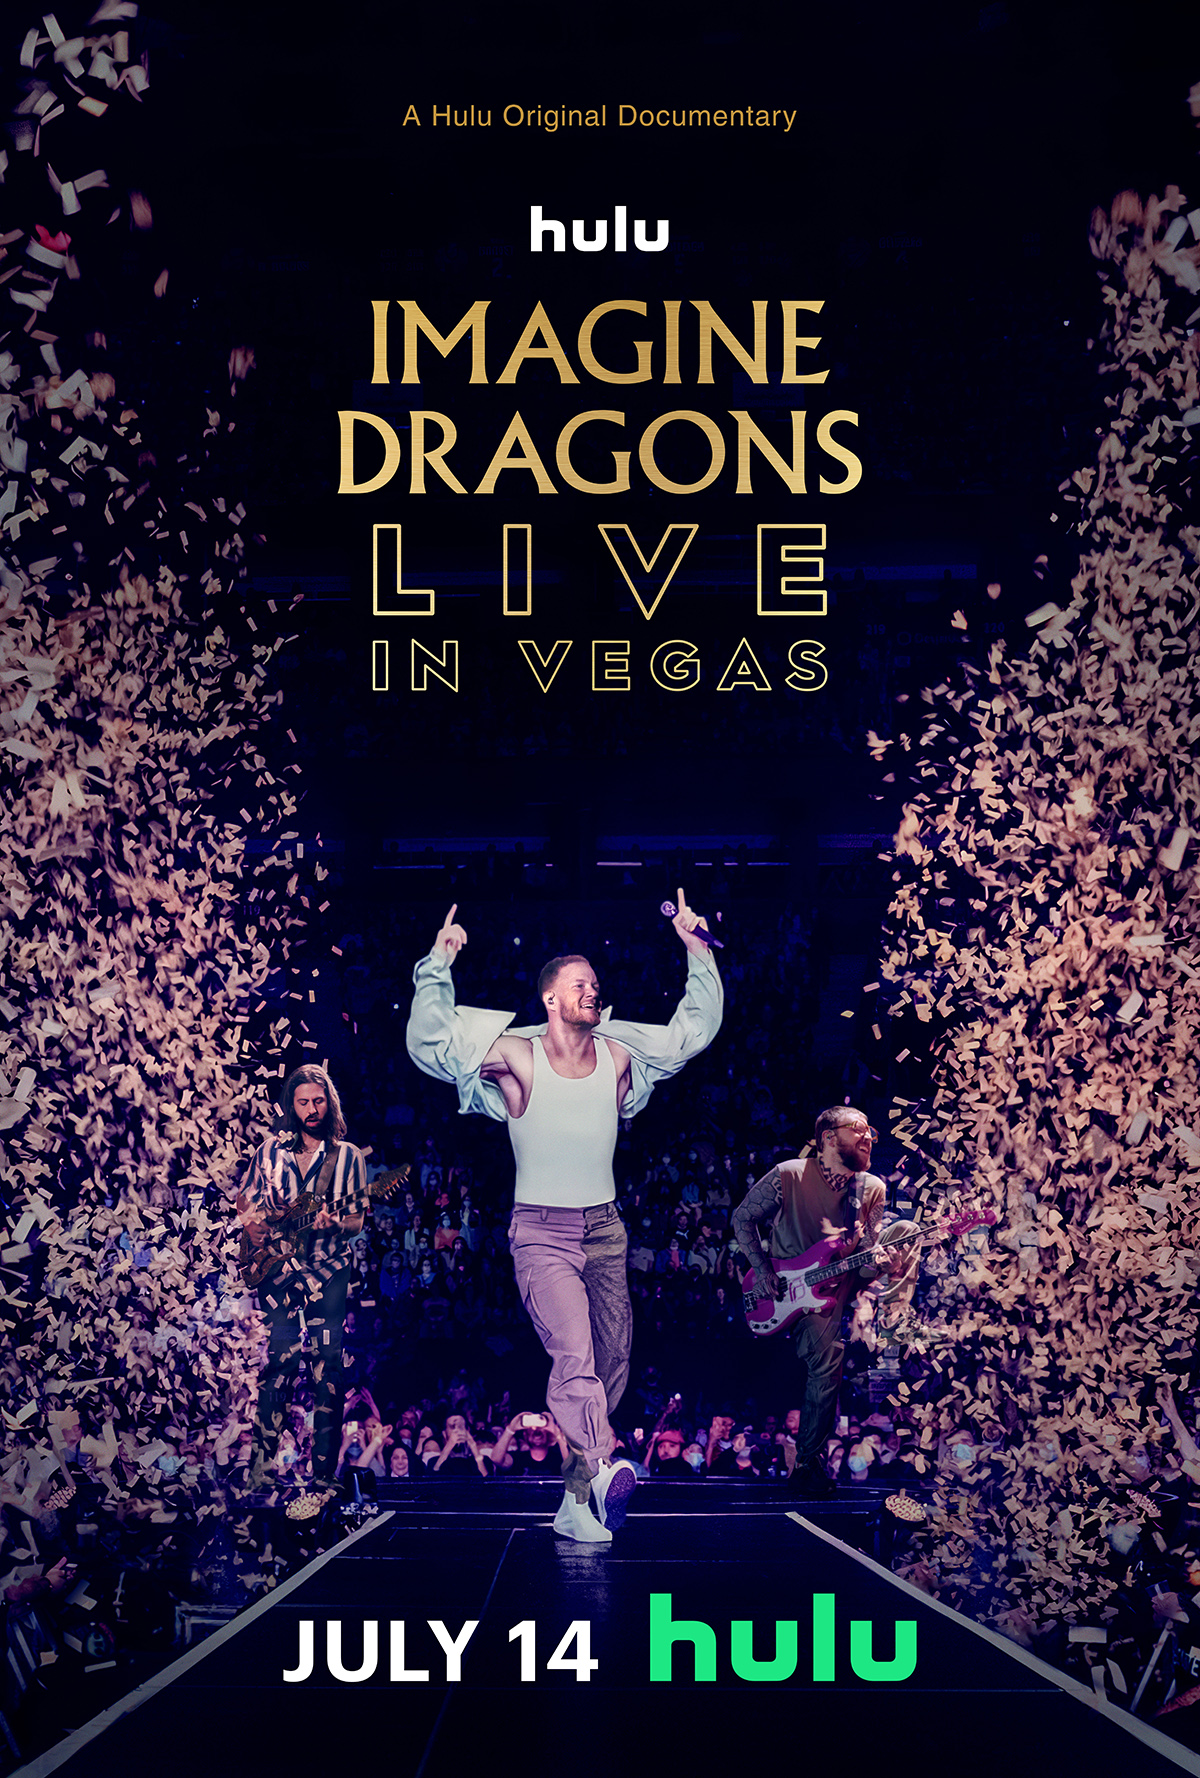 “IMAGINE DRAGONS LIVE IN VEGAS” Documentary To Hit HULU On July 14th! Icon Vs